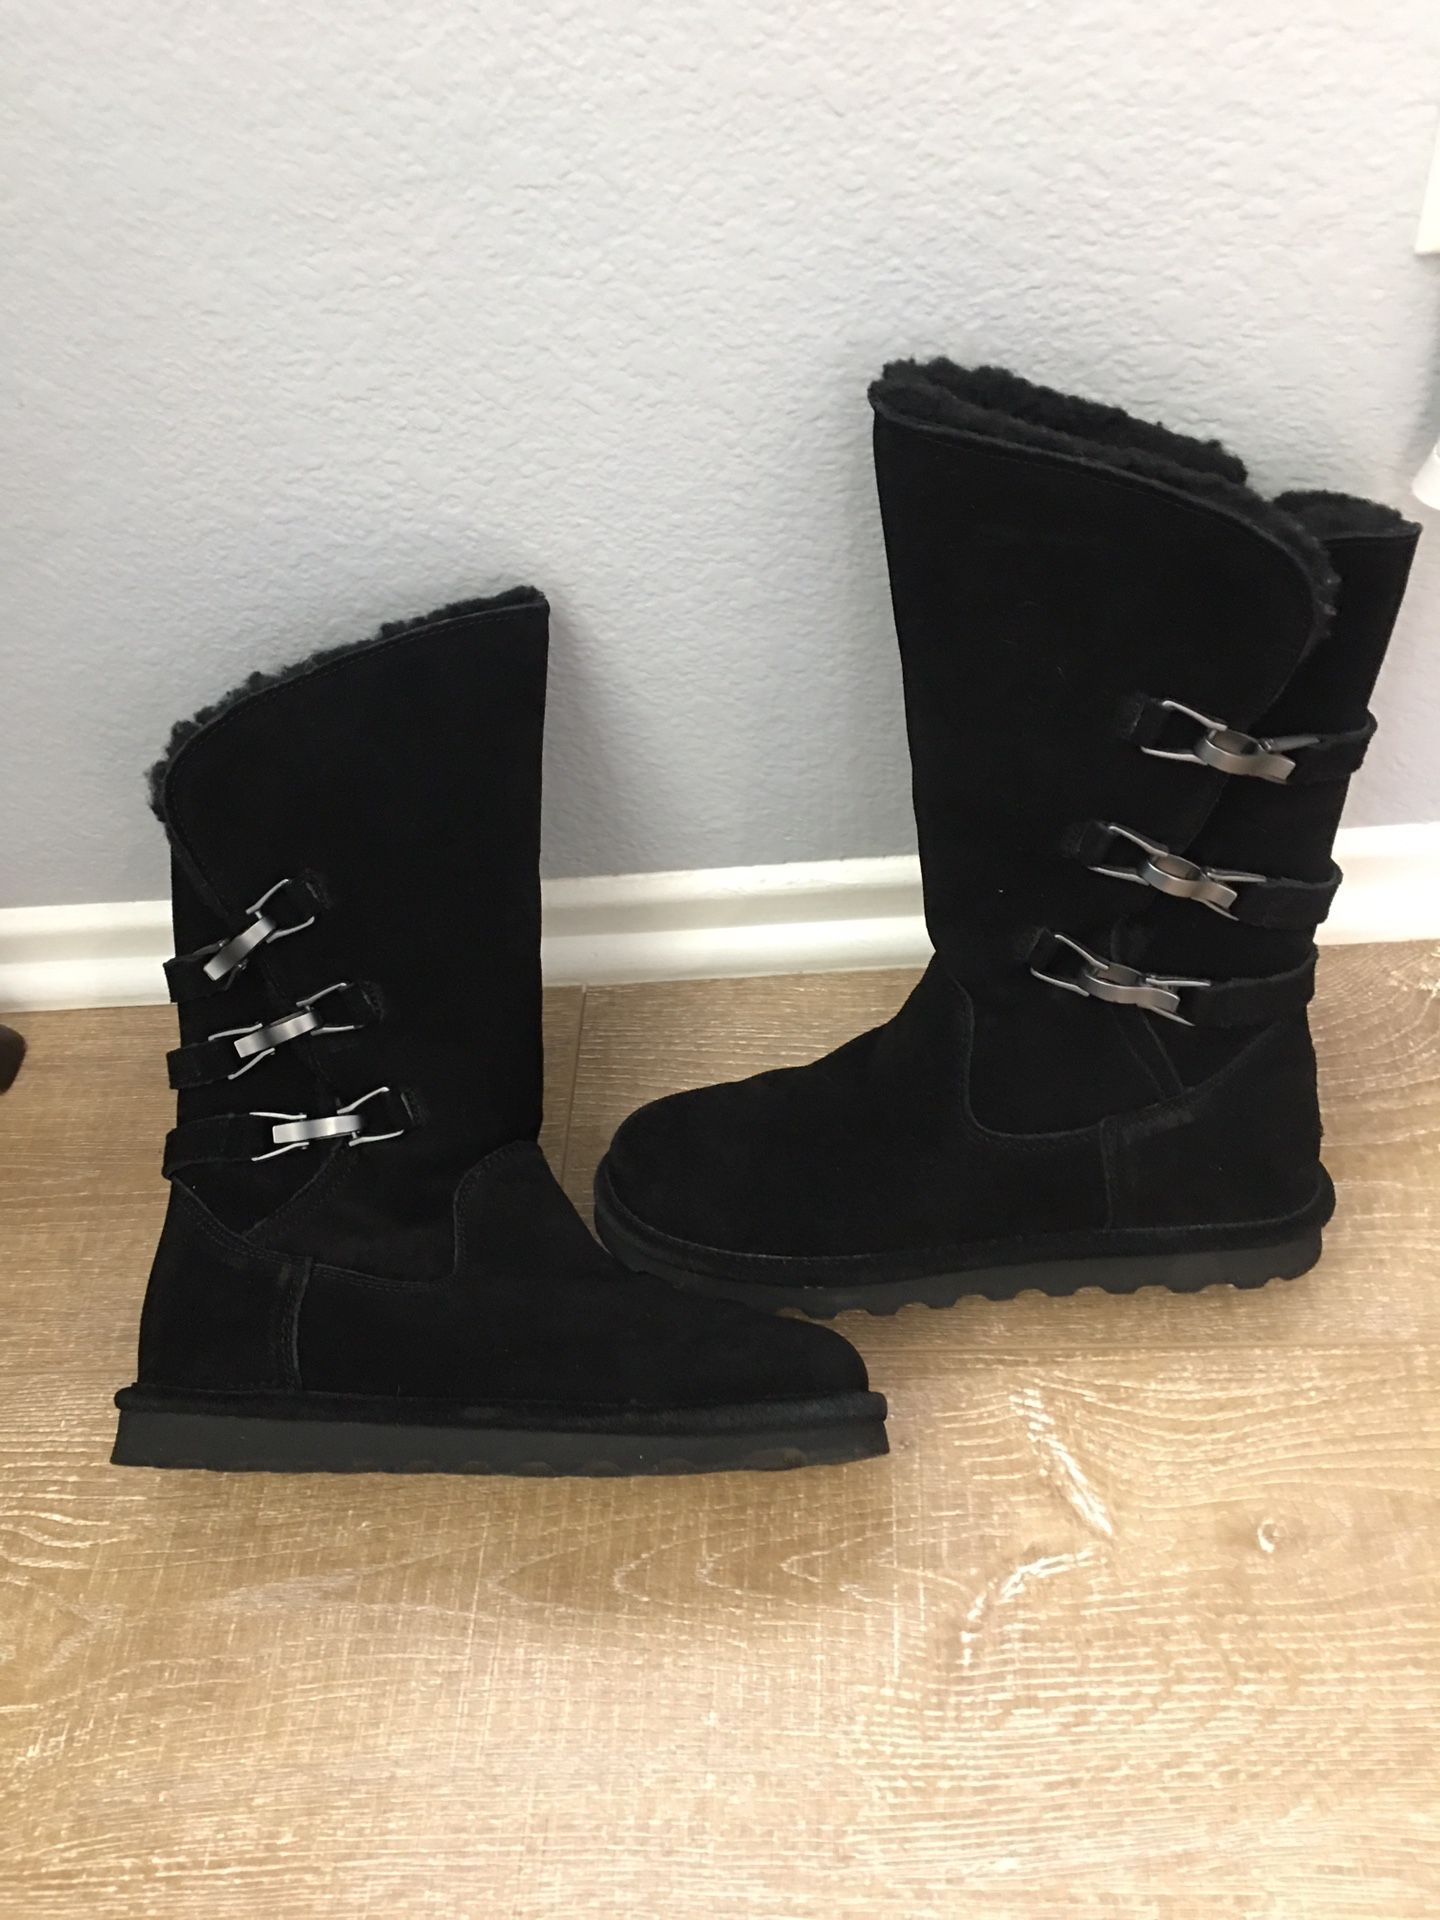 Ladies Size 8 Bear Paw Black Winter  Boots  (Water resistant protected)